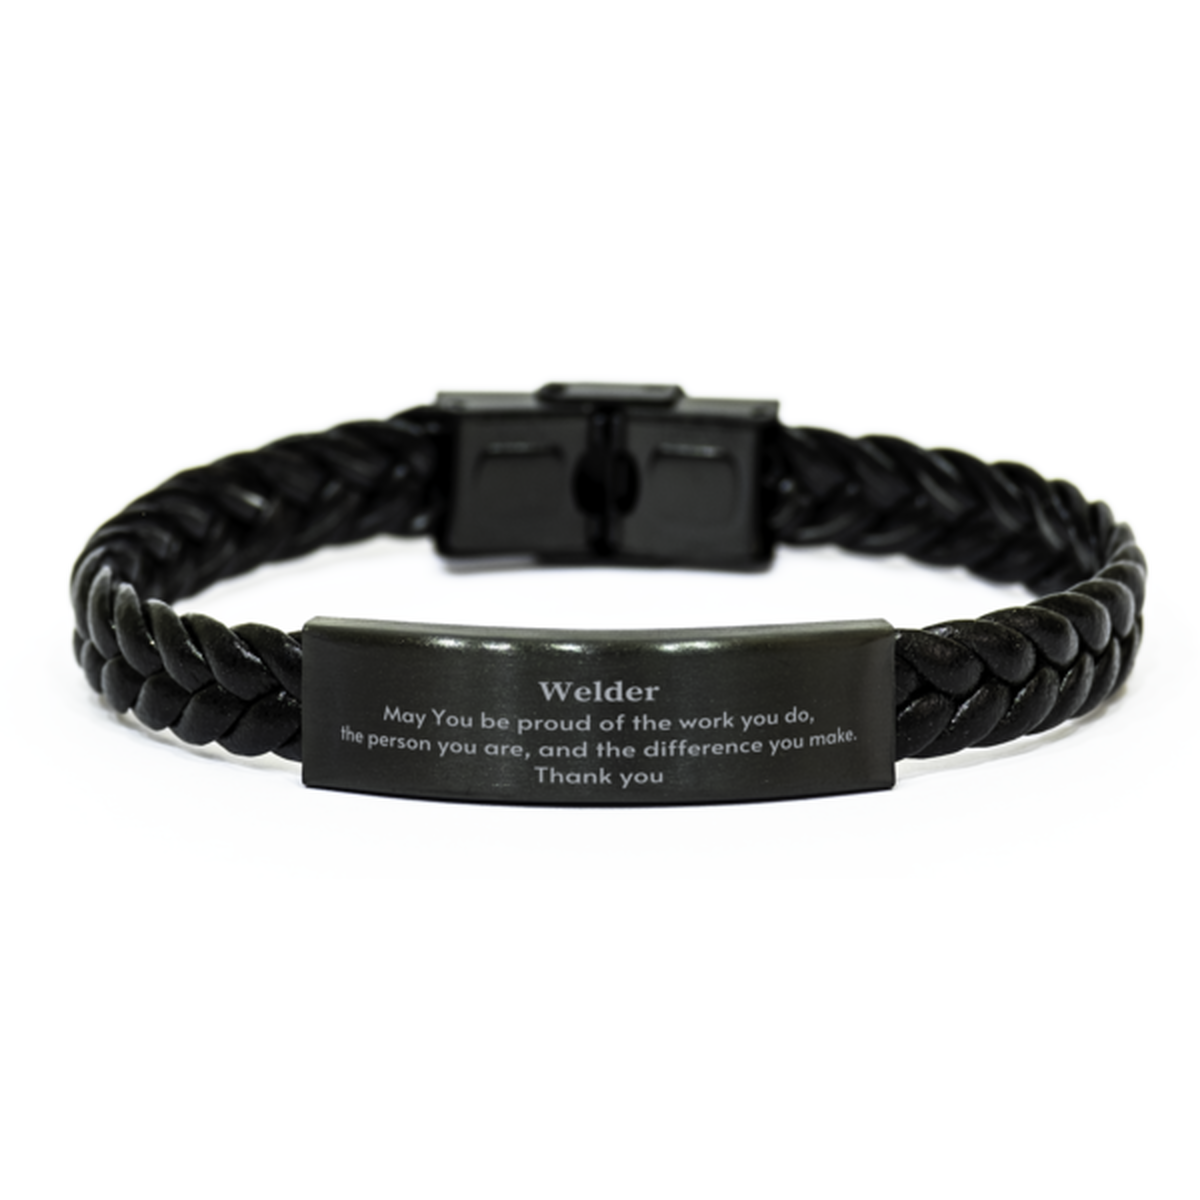 Heartwarming Braided Leather Bracelet Retirement Coworkers Gifts for Welder, Welder May You be proud of the work you do, the person you are Gifts for Boss Men Women Friends